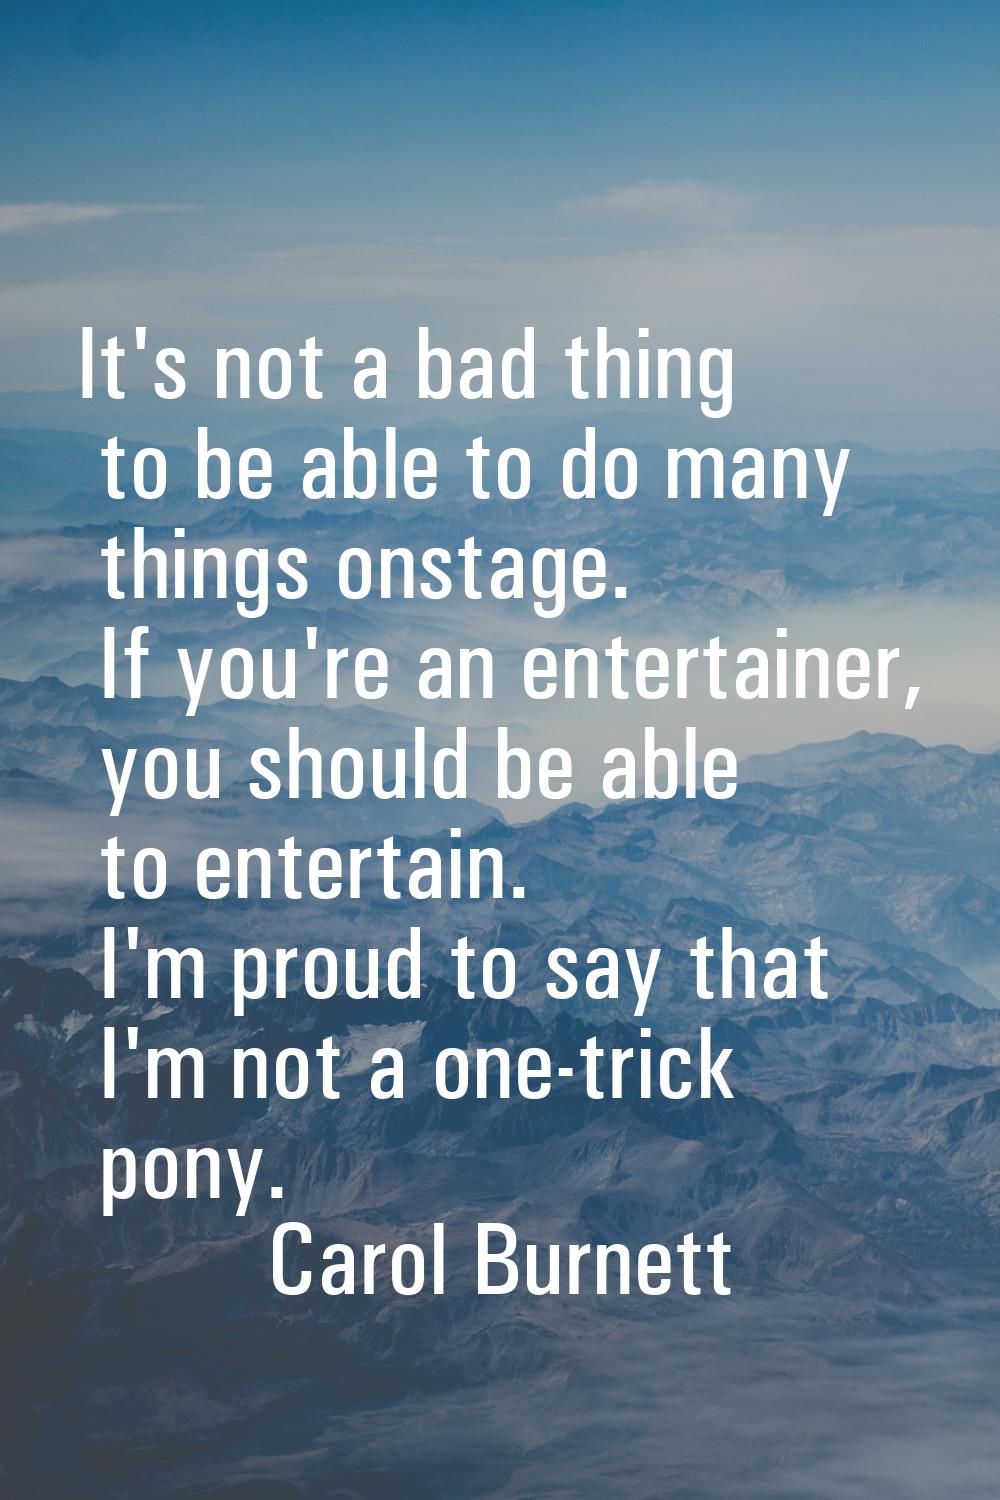 It's not a bad thing to be able to do many things onstage. If you're an entertainer, you should be 